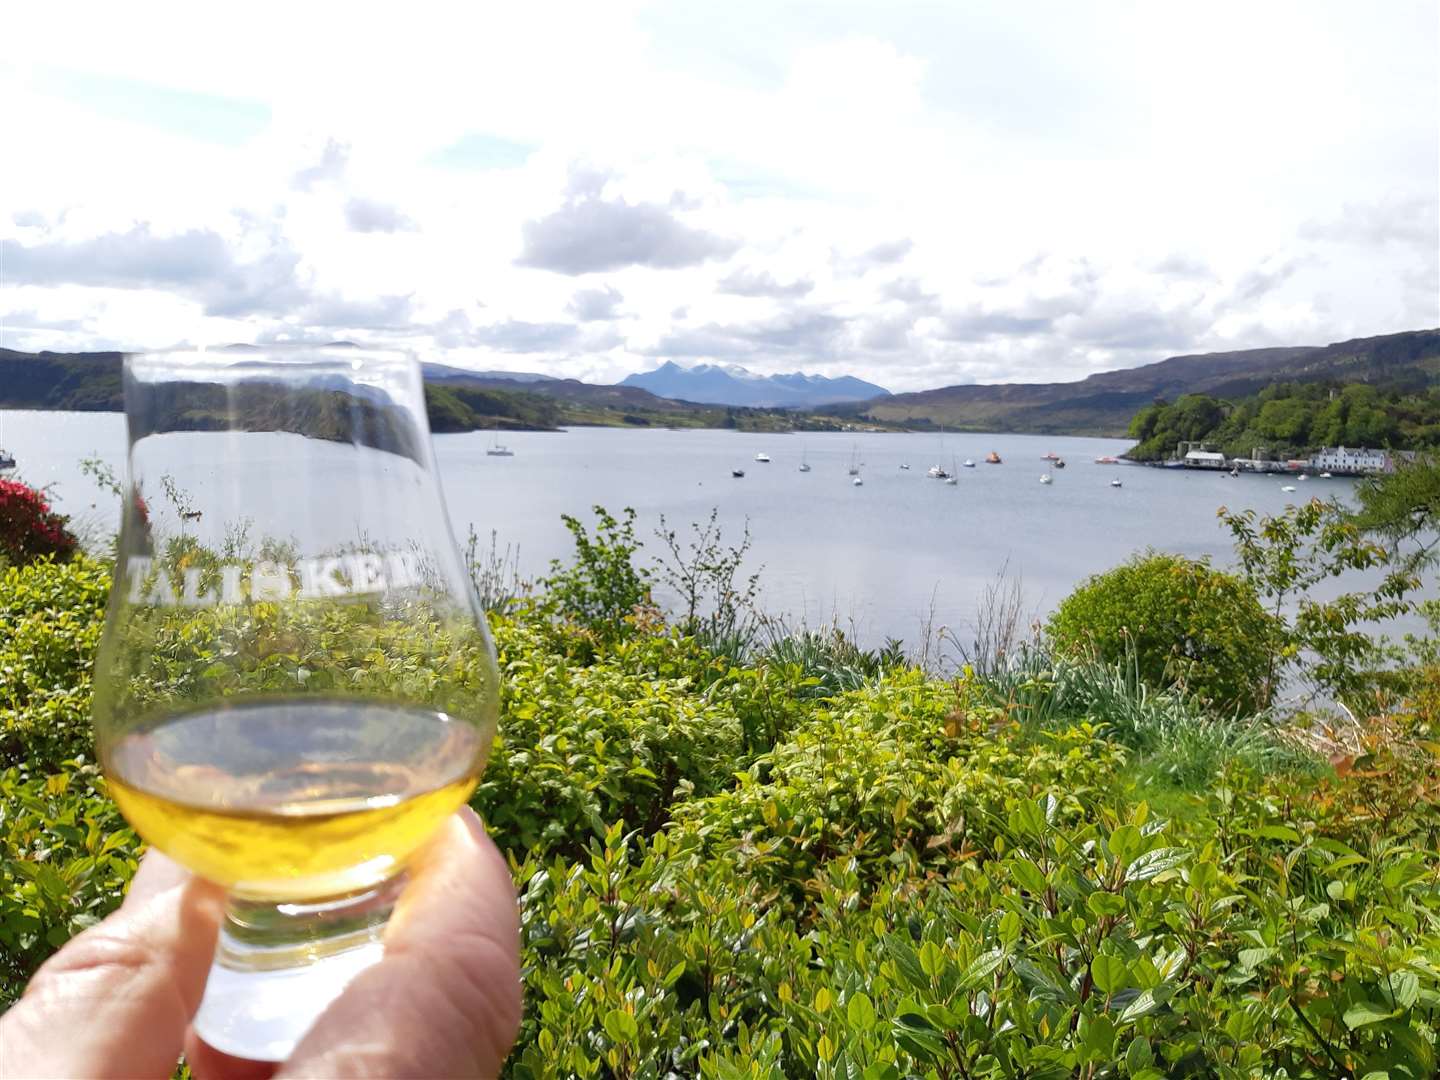 You can enjoy a whisky while looking over Portree, on the Isle of Skye (12429256)